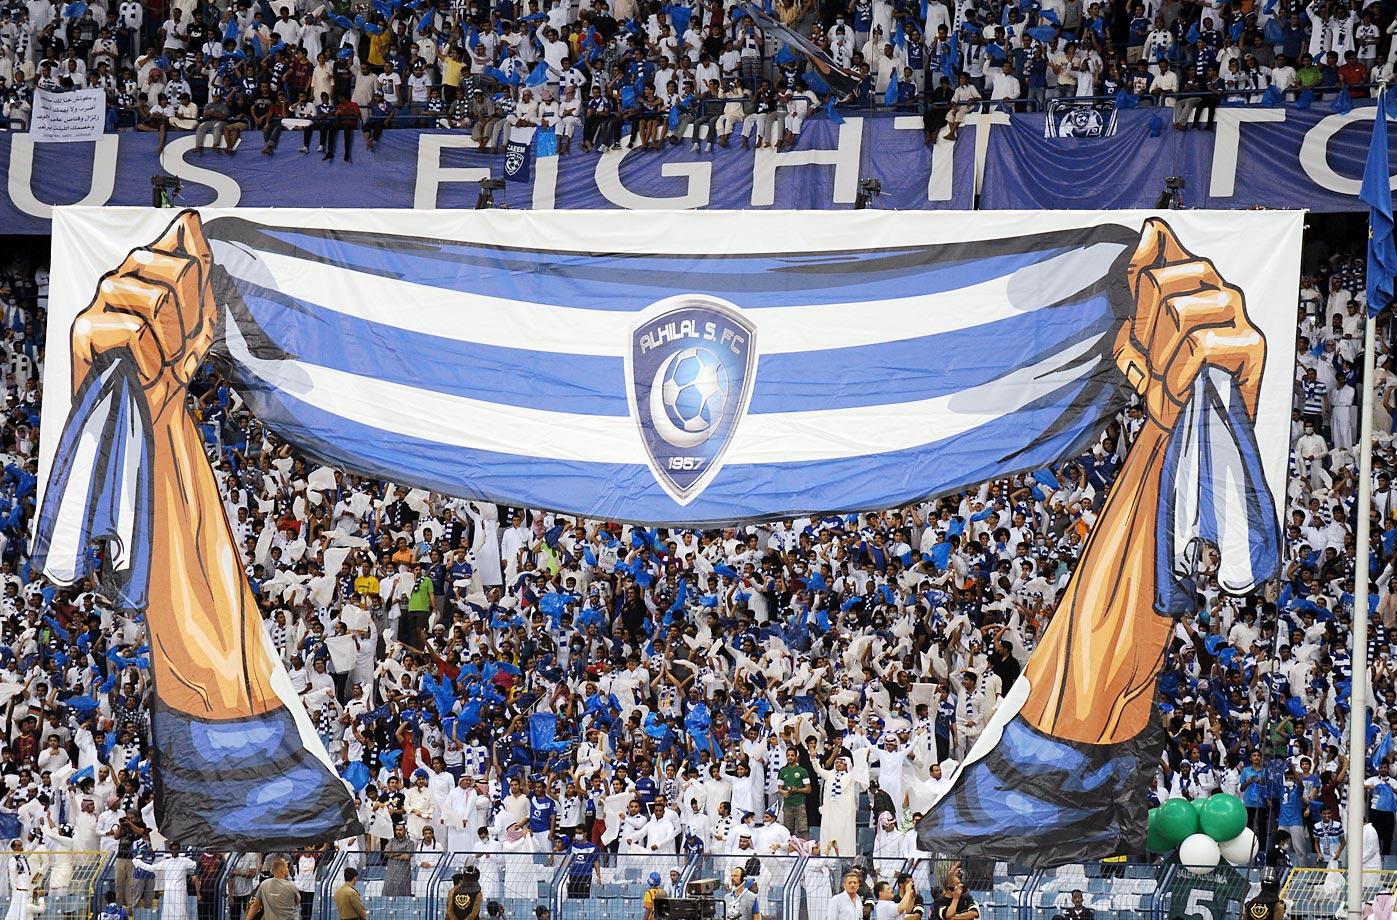 Tifos: Best soccer fan displays around the world (PHOTOS)